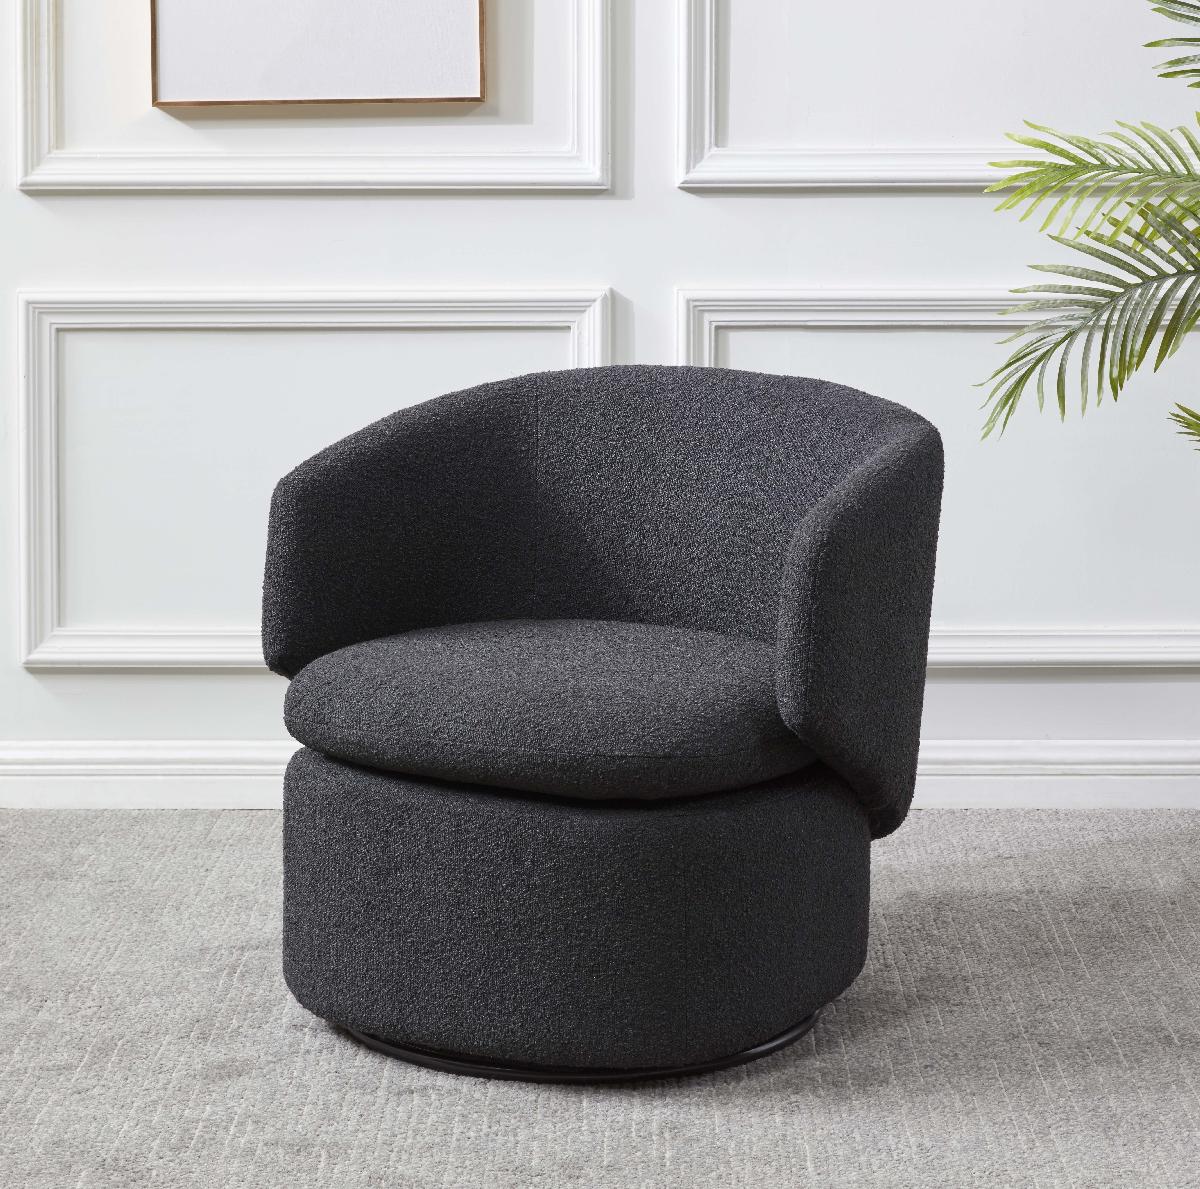 Safavieh Couture Phyllis Boucle Swivel Chair